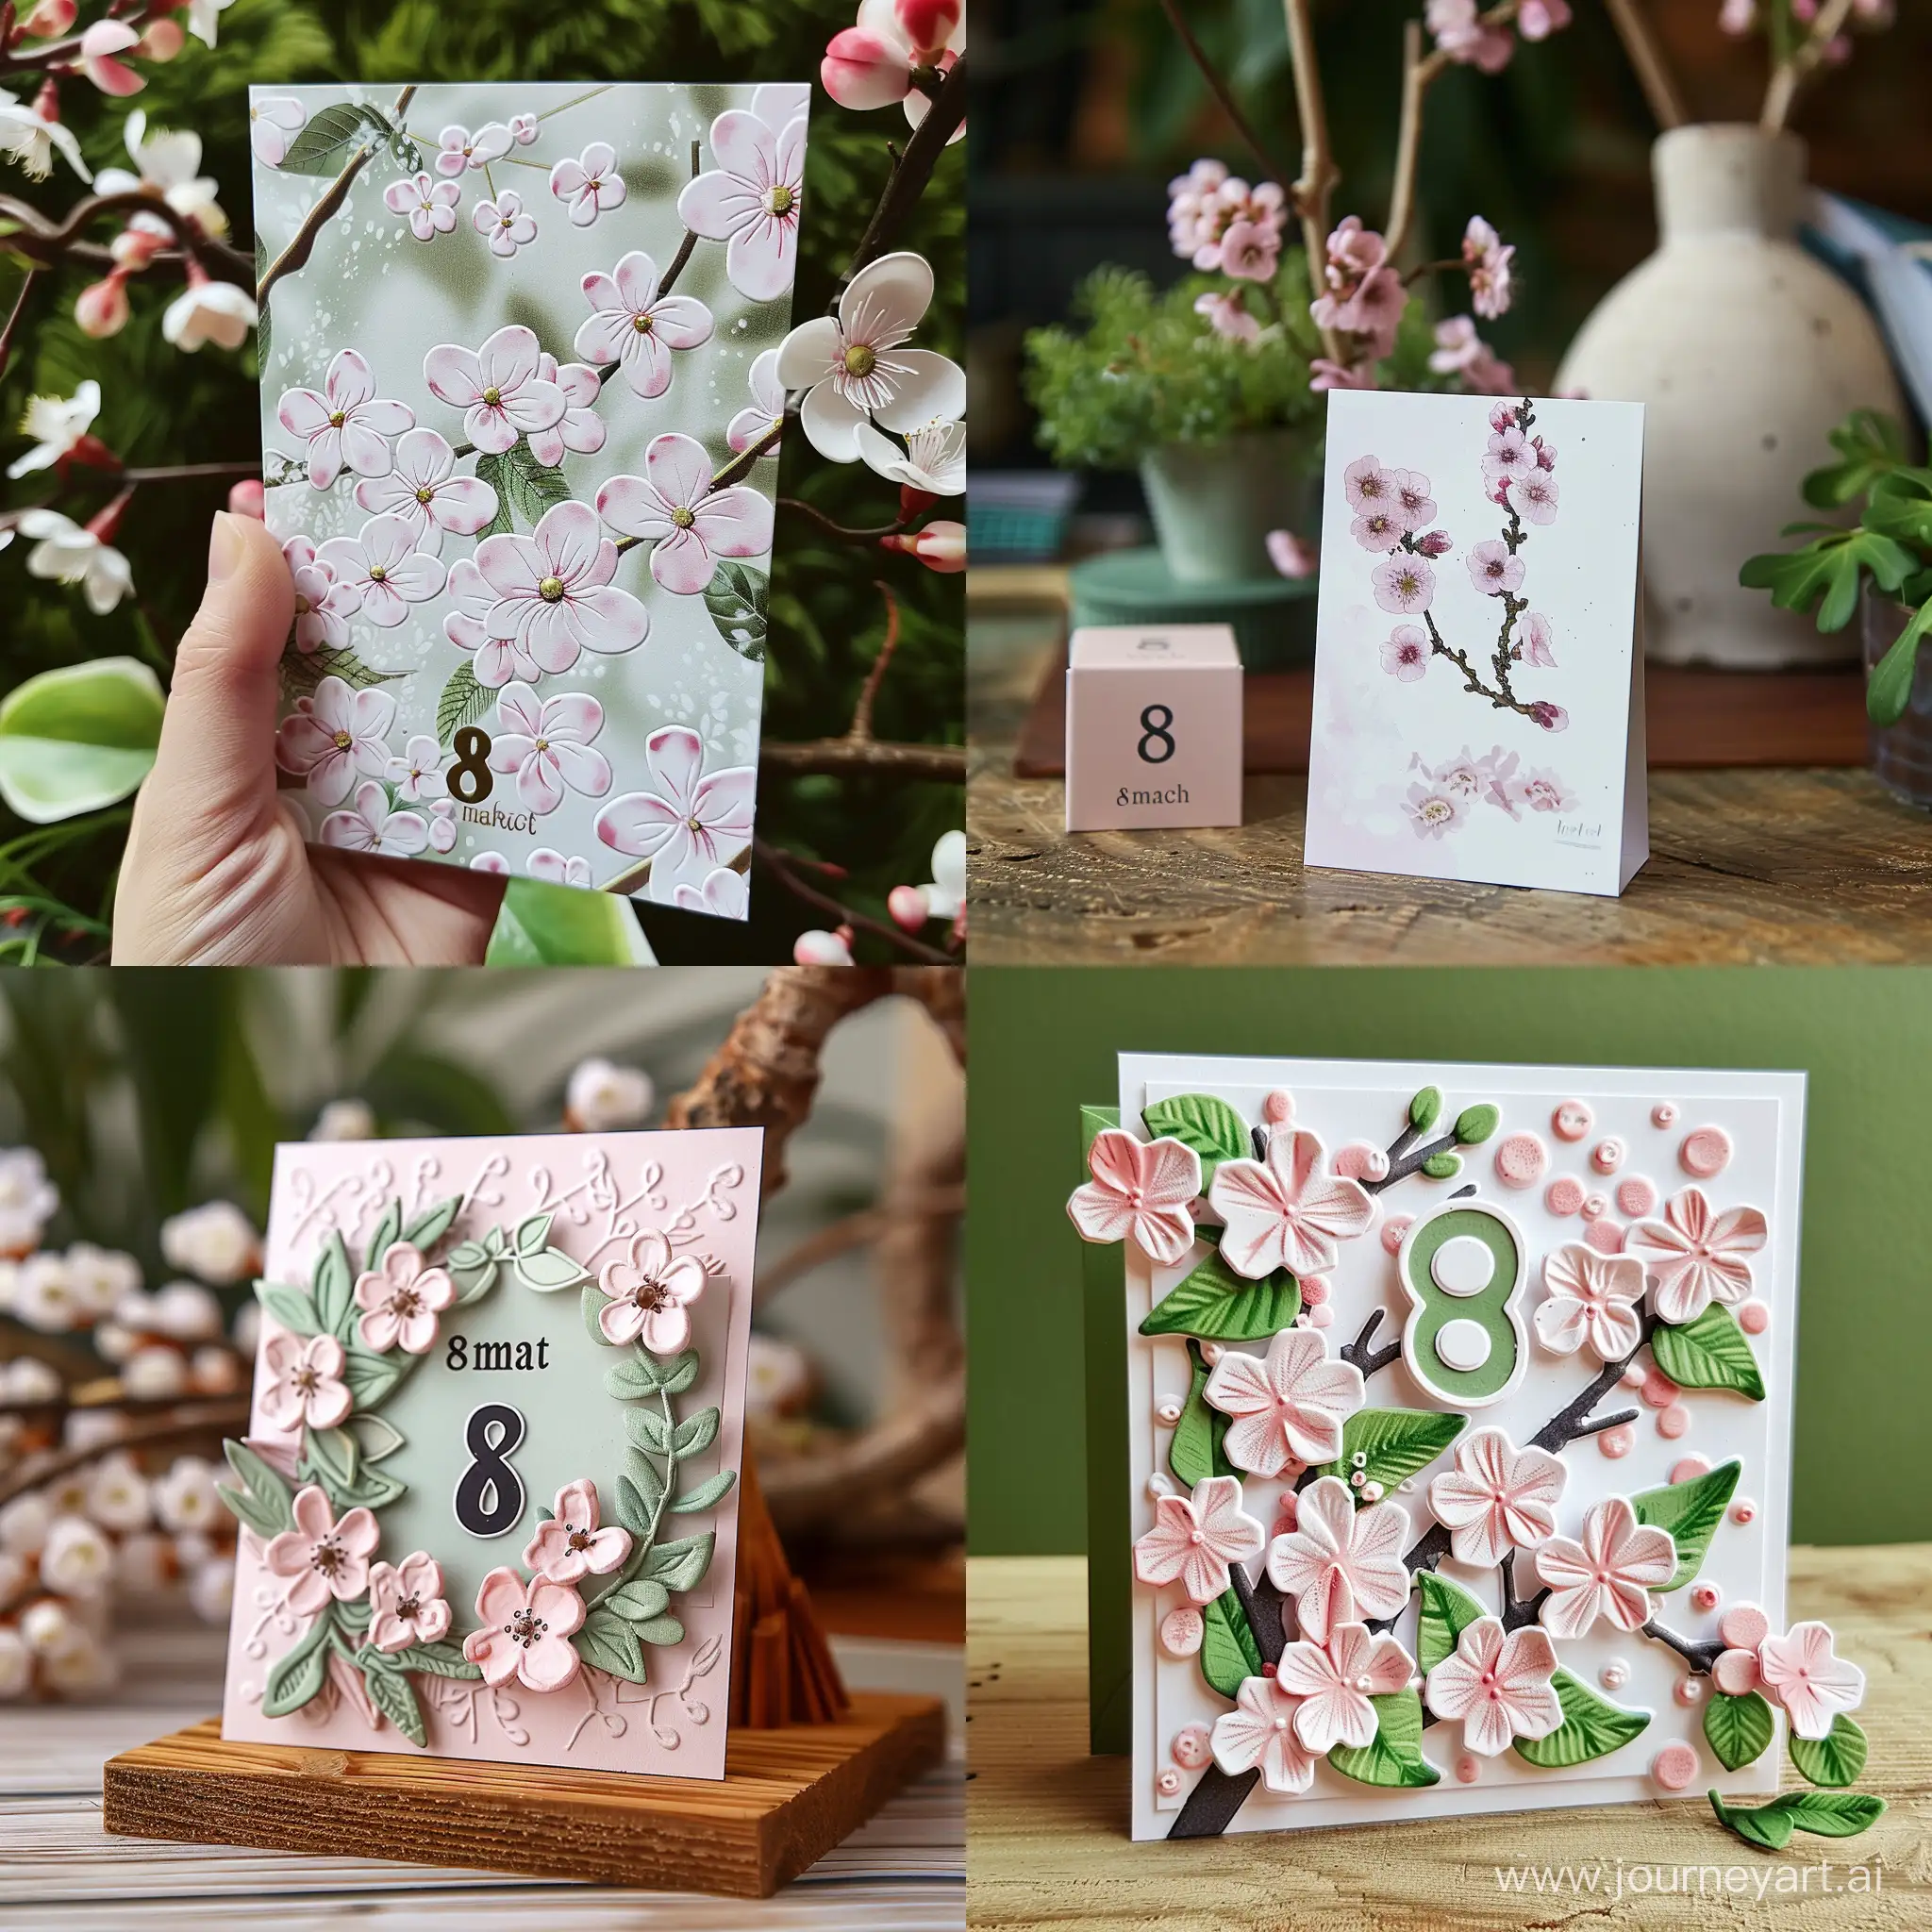 Spring-Partner-Card-with-Vibrant-Flowers-for-8-March-Celebration